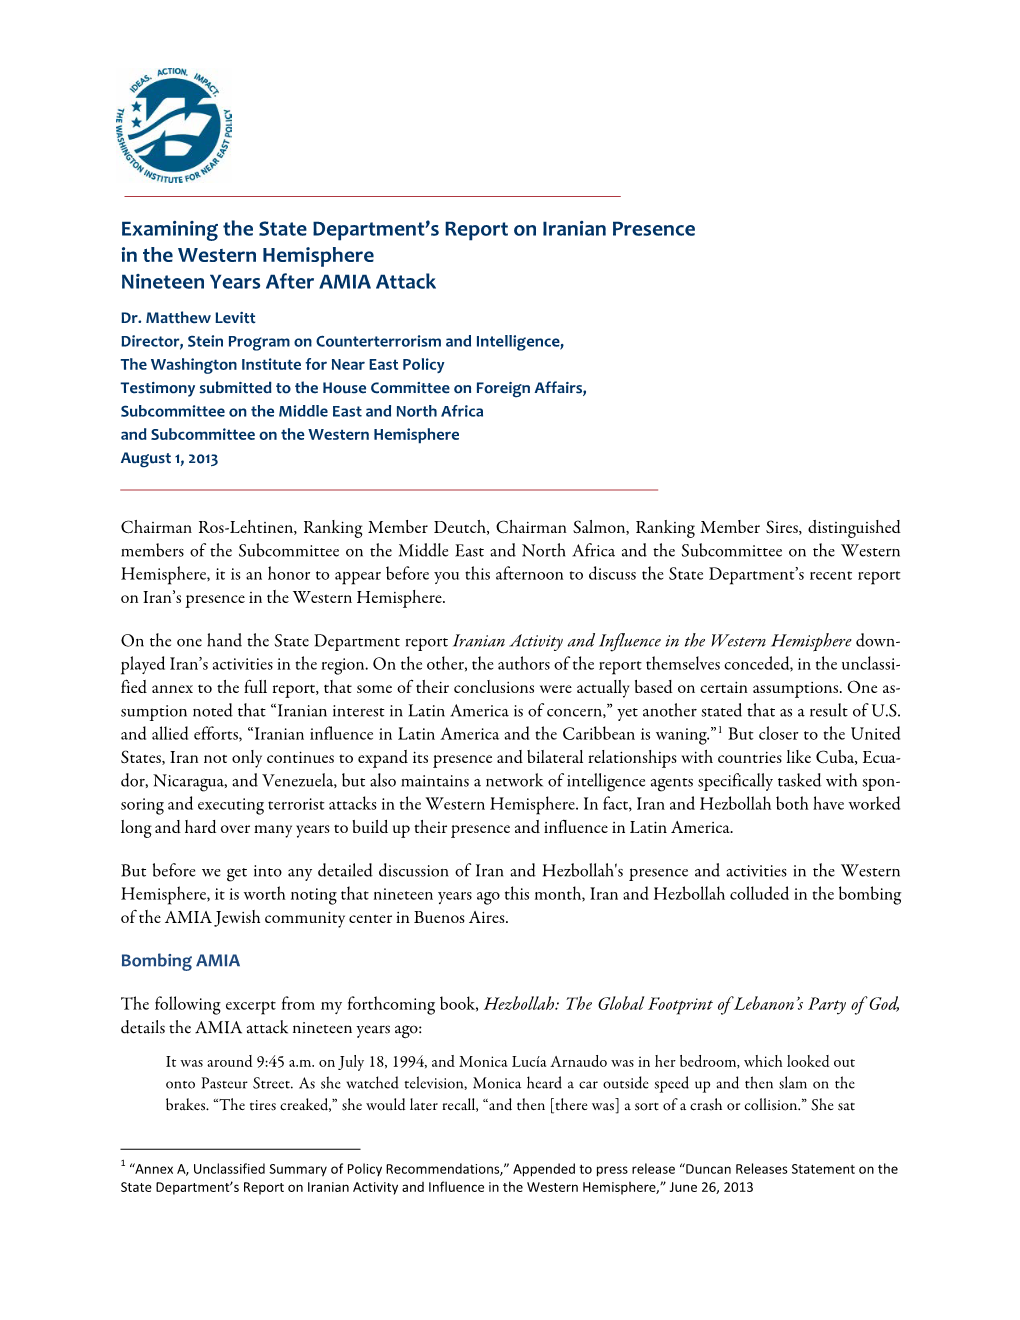 Examining the State Department's Report on Iranian Presence in The